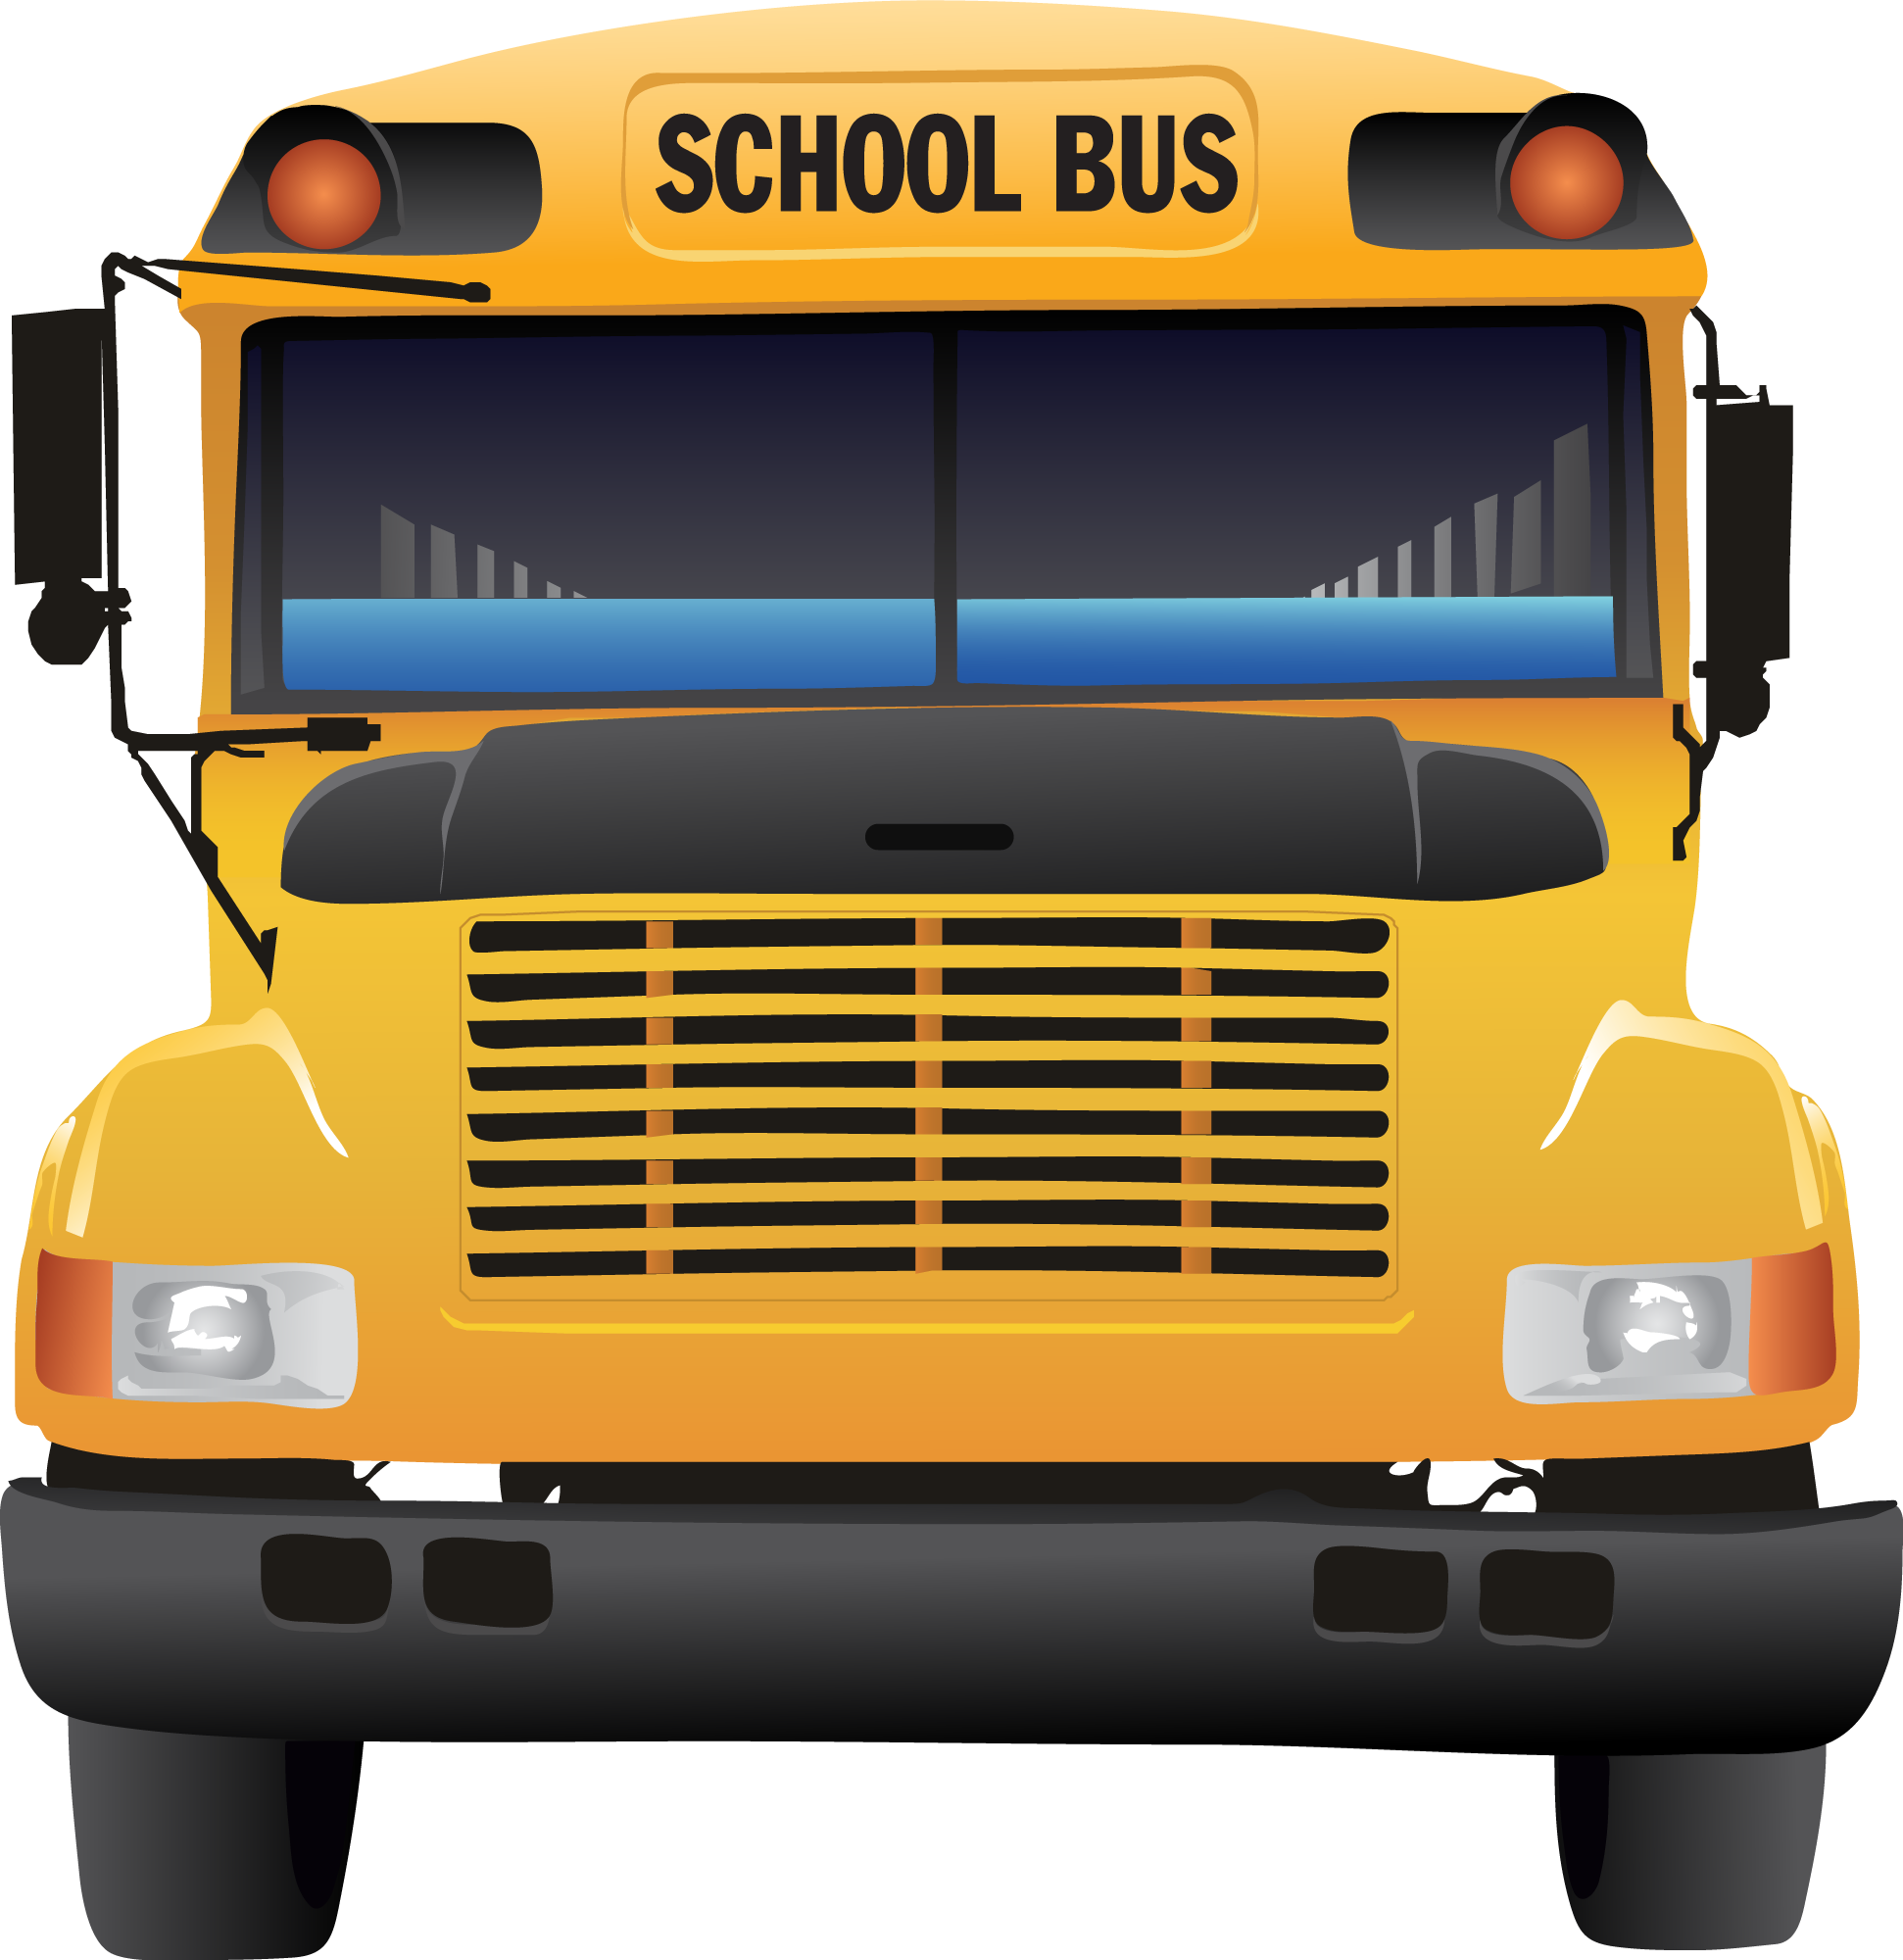 School Bus from Clipart Collection Version 1.0 (1) ©2012 Macmanus ...